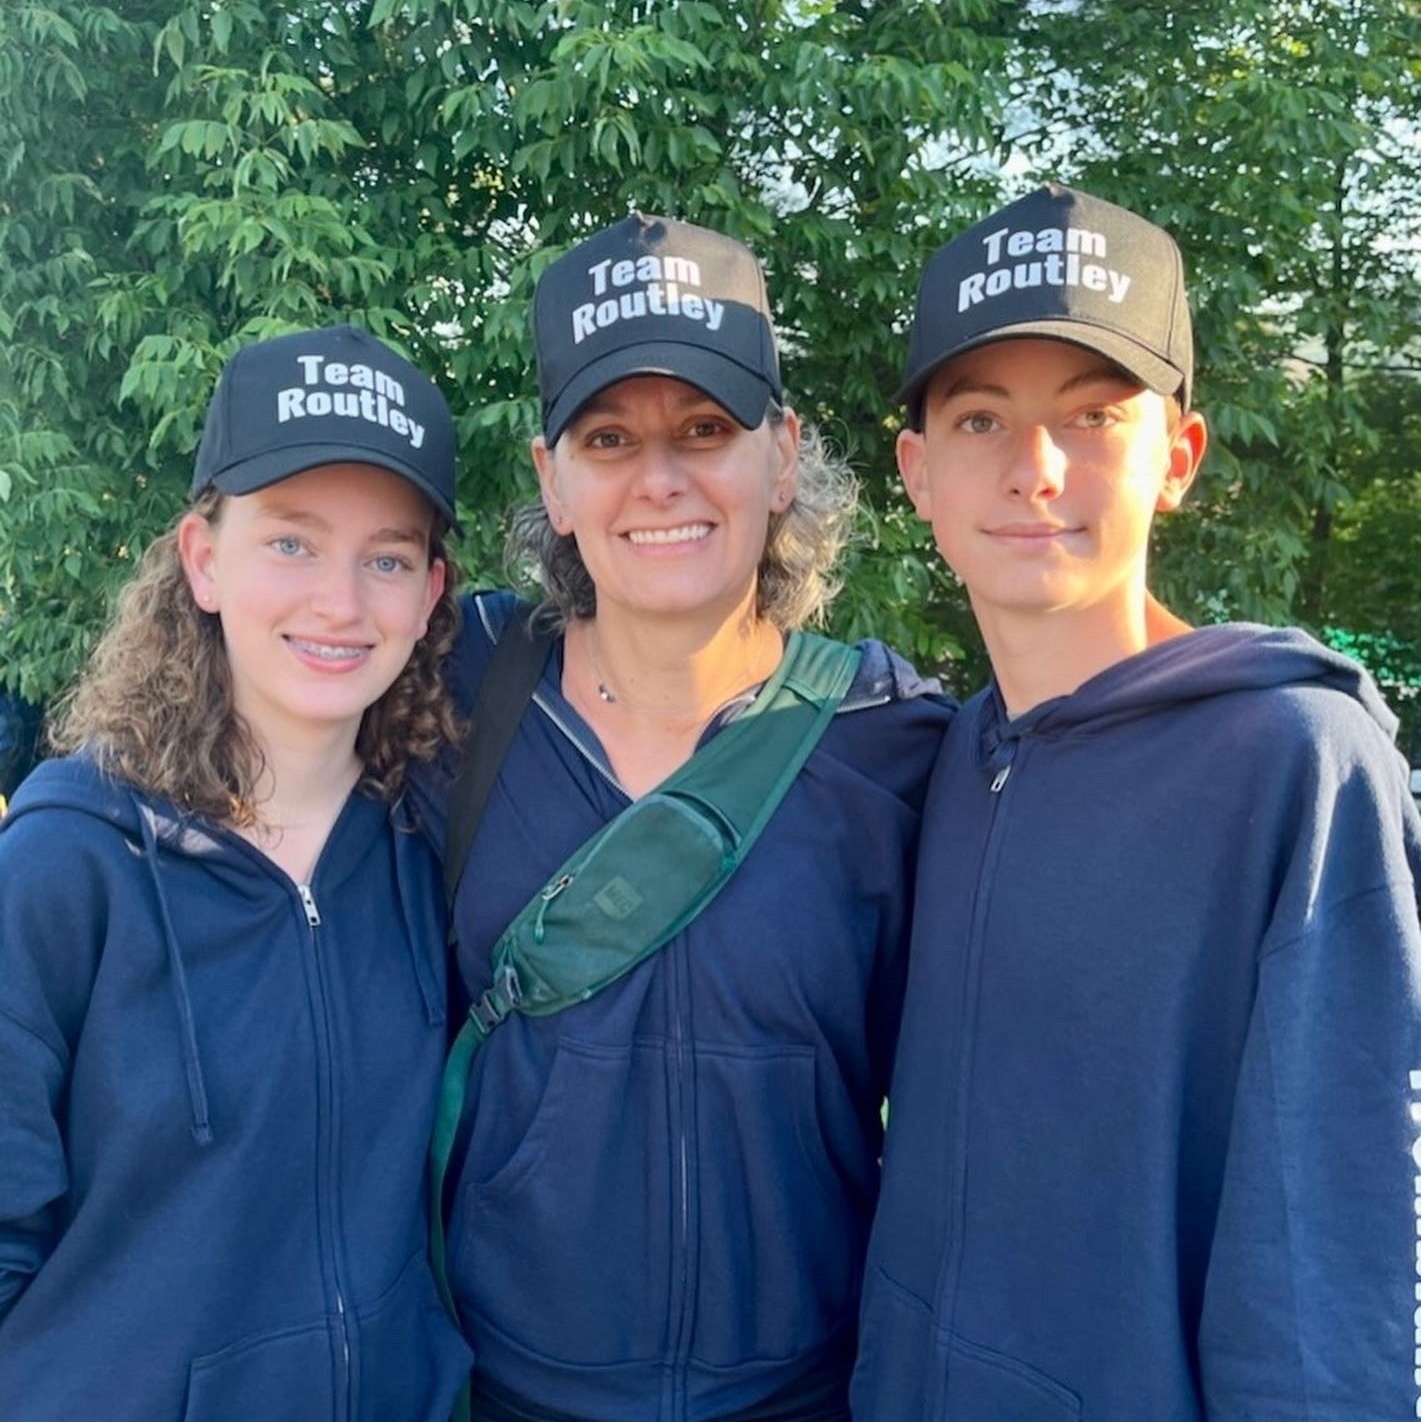 My wife, daughter, and son, wearing Team Routley hats at the race start